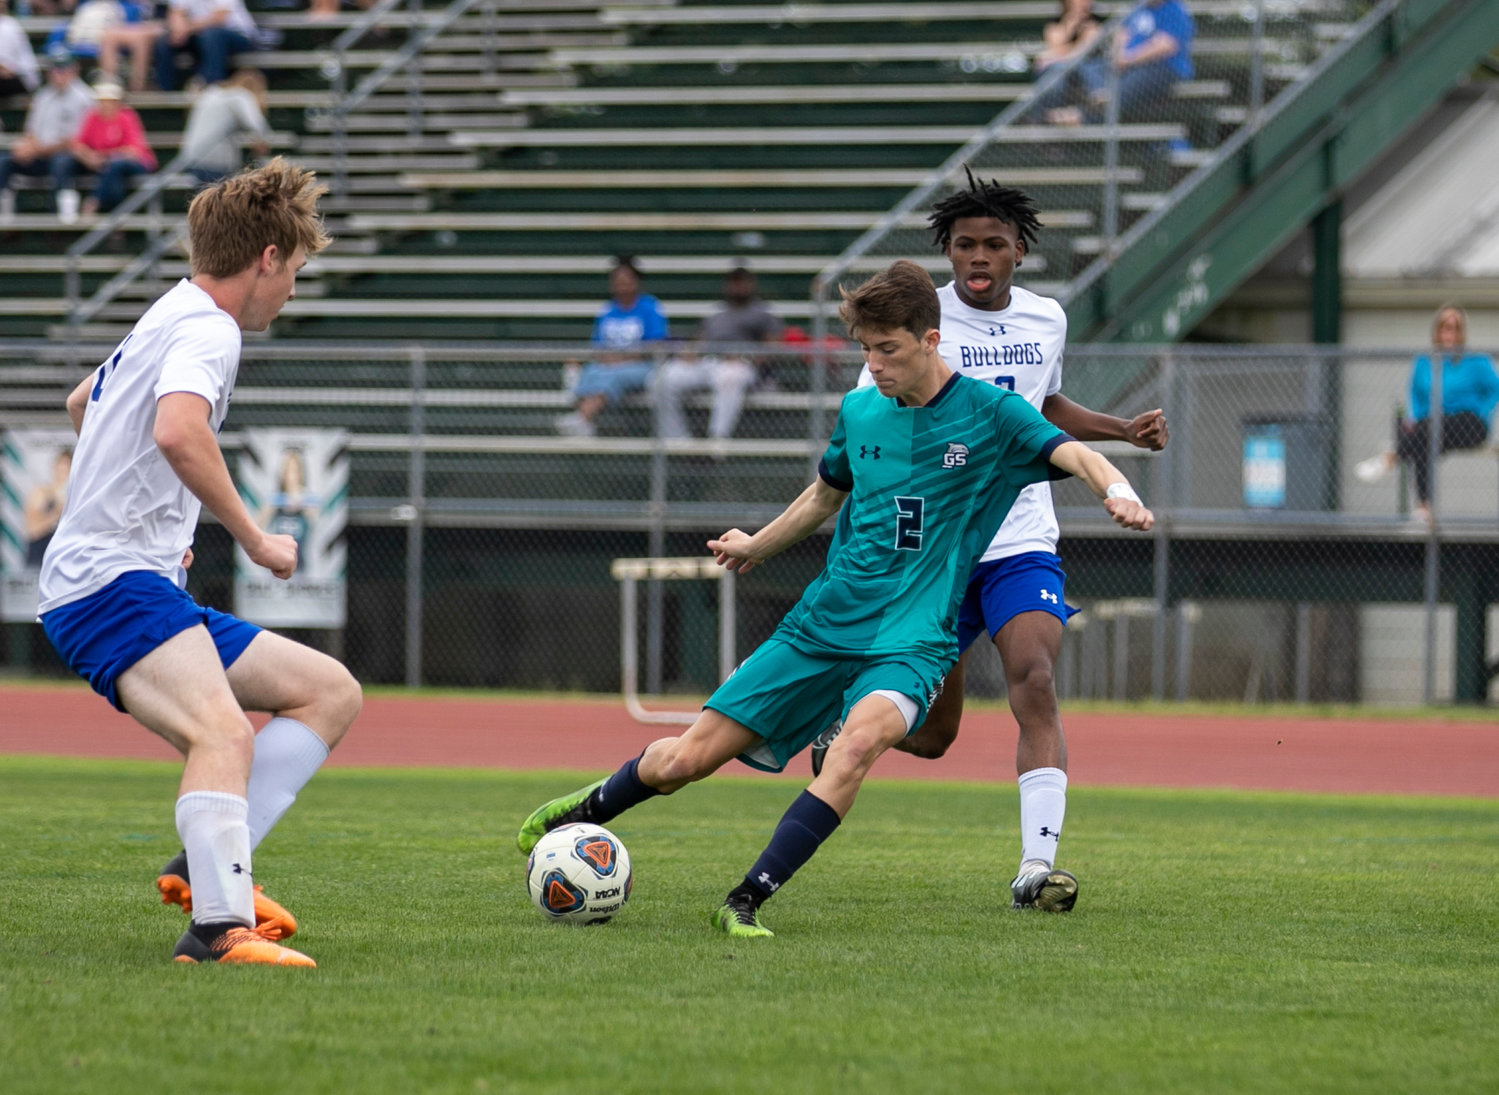 Gulf Shores junior Talan Galvan connects on his first of two goals that helped the Dolphins win their first Island Cup contest Saturday afternoon against the Marbury Bulldogs at the Sportsplex by a 3-1 margin.